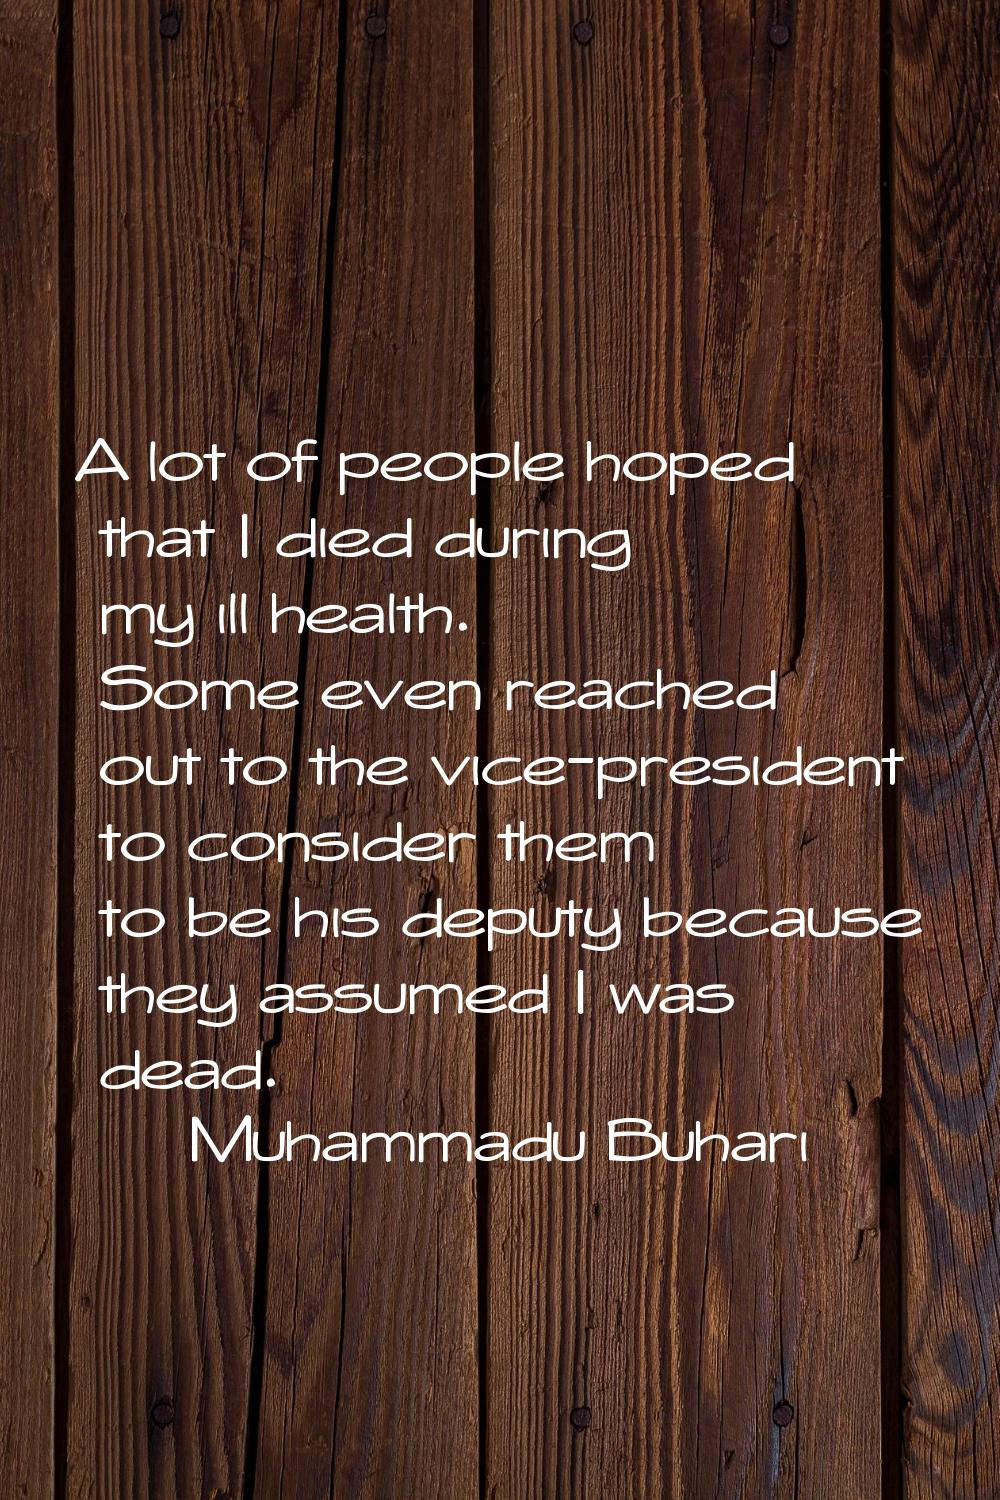 A lot of people hoped that I died during my ill health. Some even reached out to the vice-president